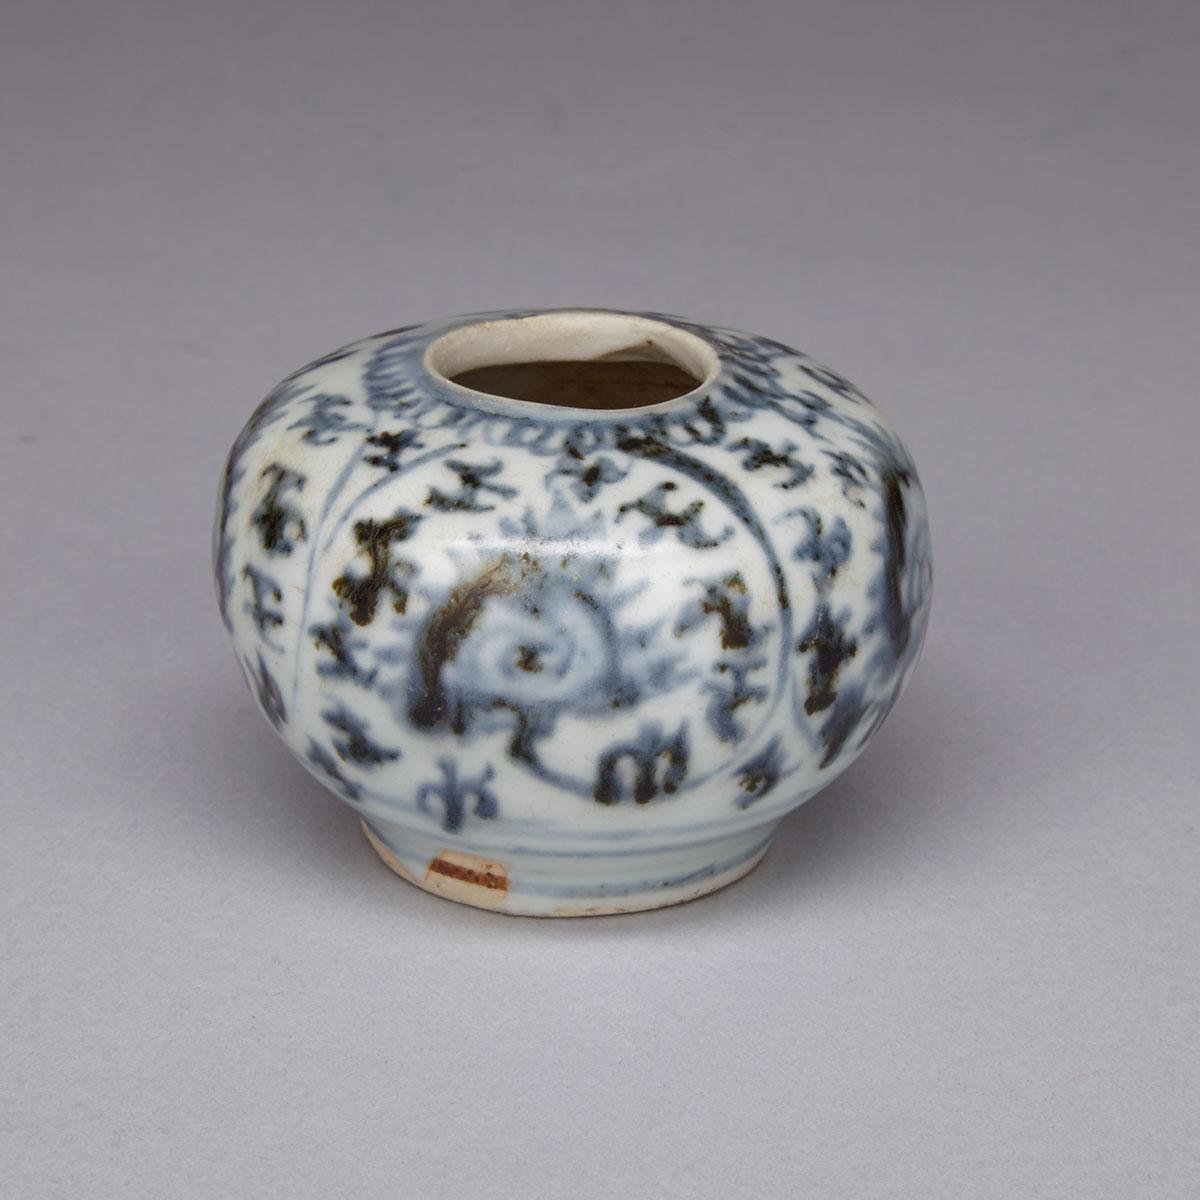 Blue and White Jarlet, 15th to 17th Century, South East Asia